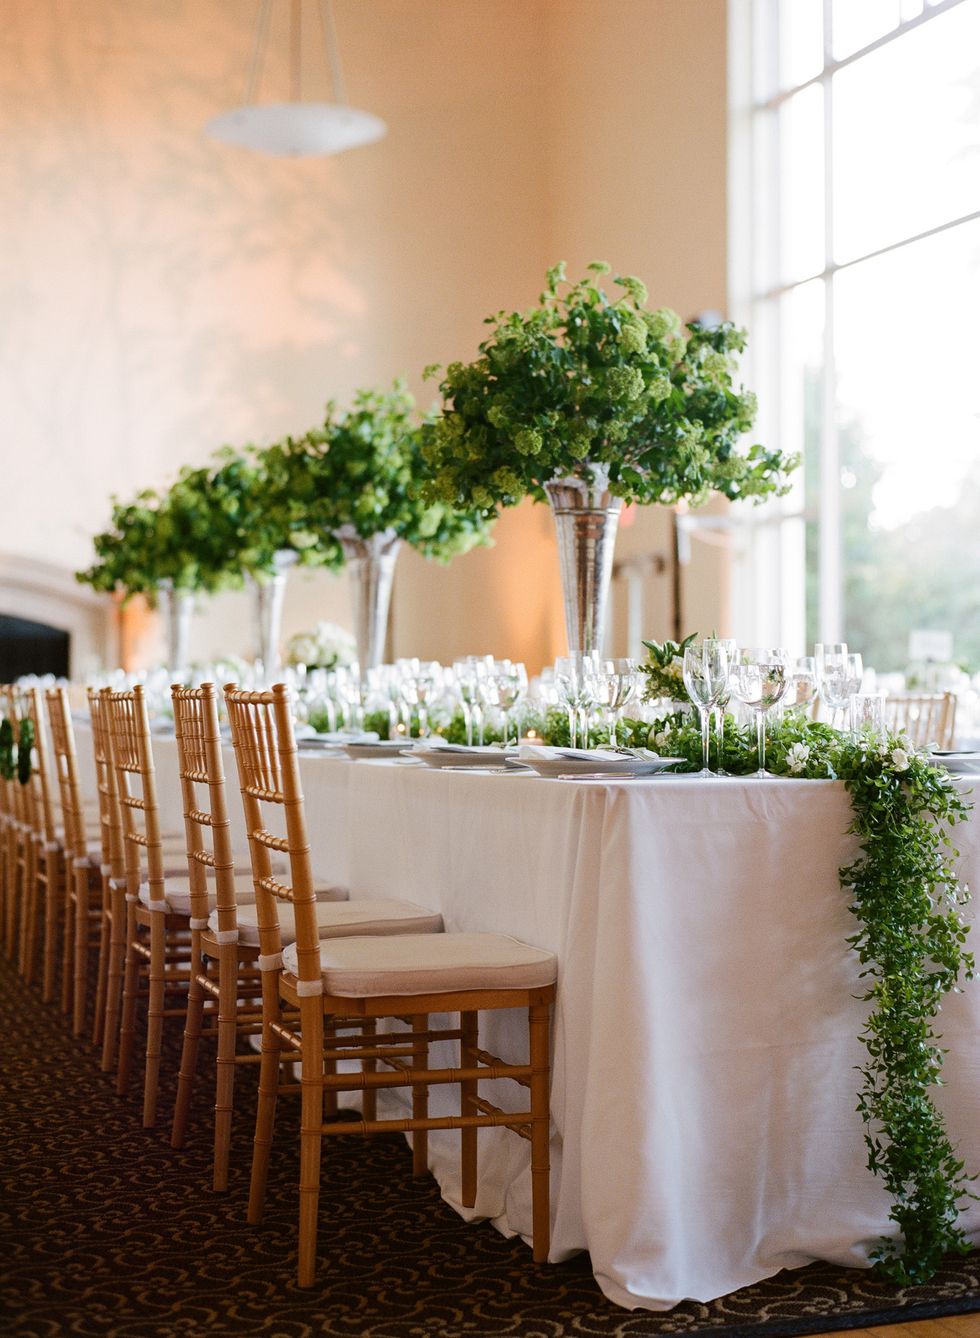 13 Beautiful Hanging Greenery Installation Ideas for Your Wedding   Greenery wedding decor, Bridal party tables, Wedding table designs